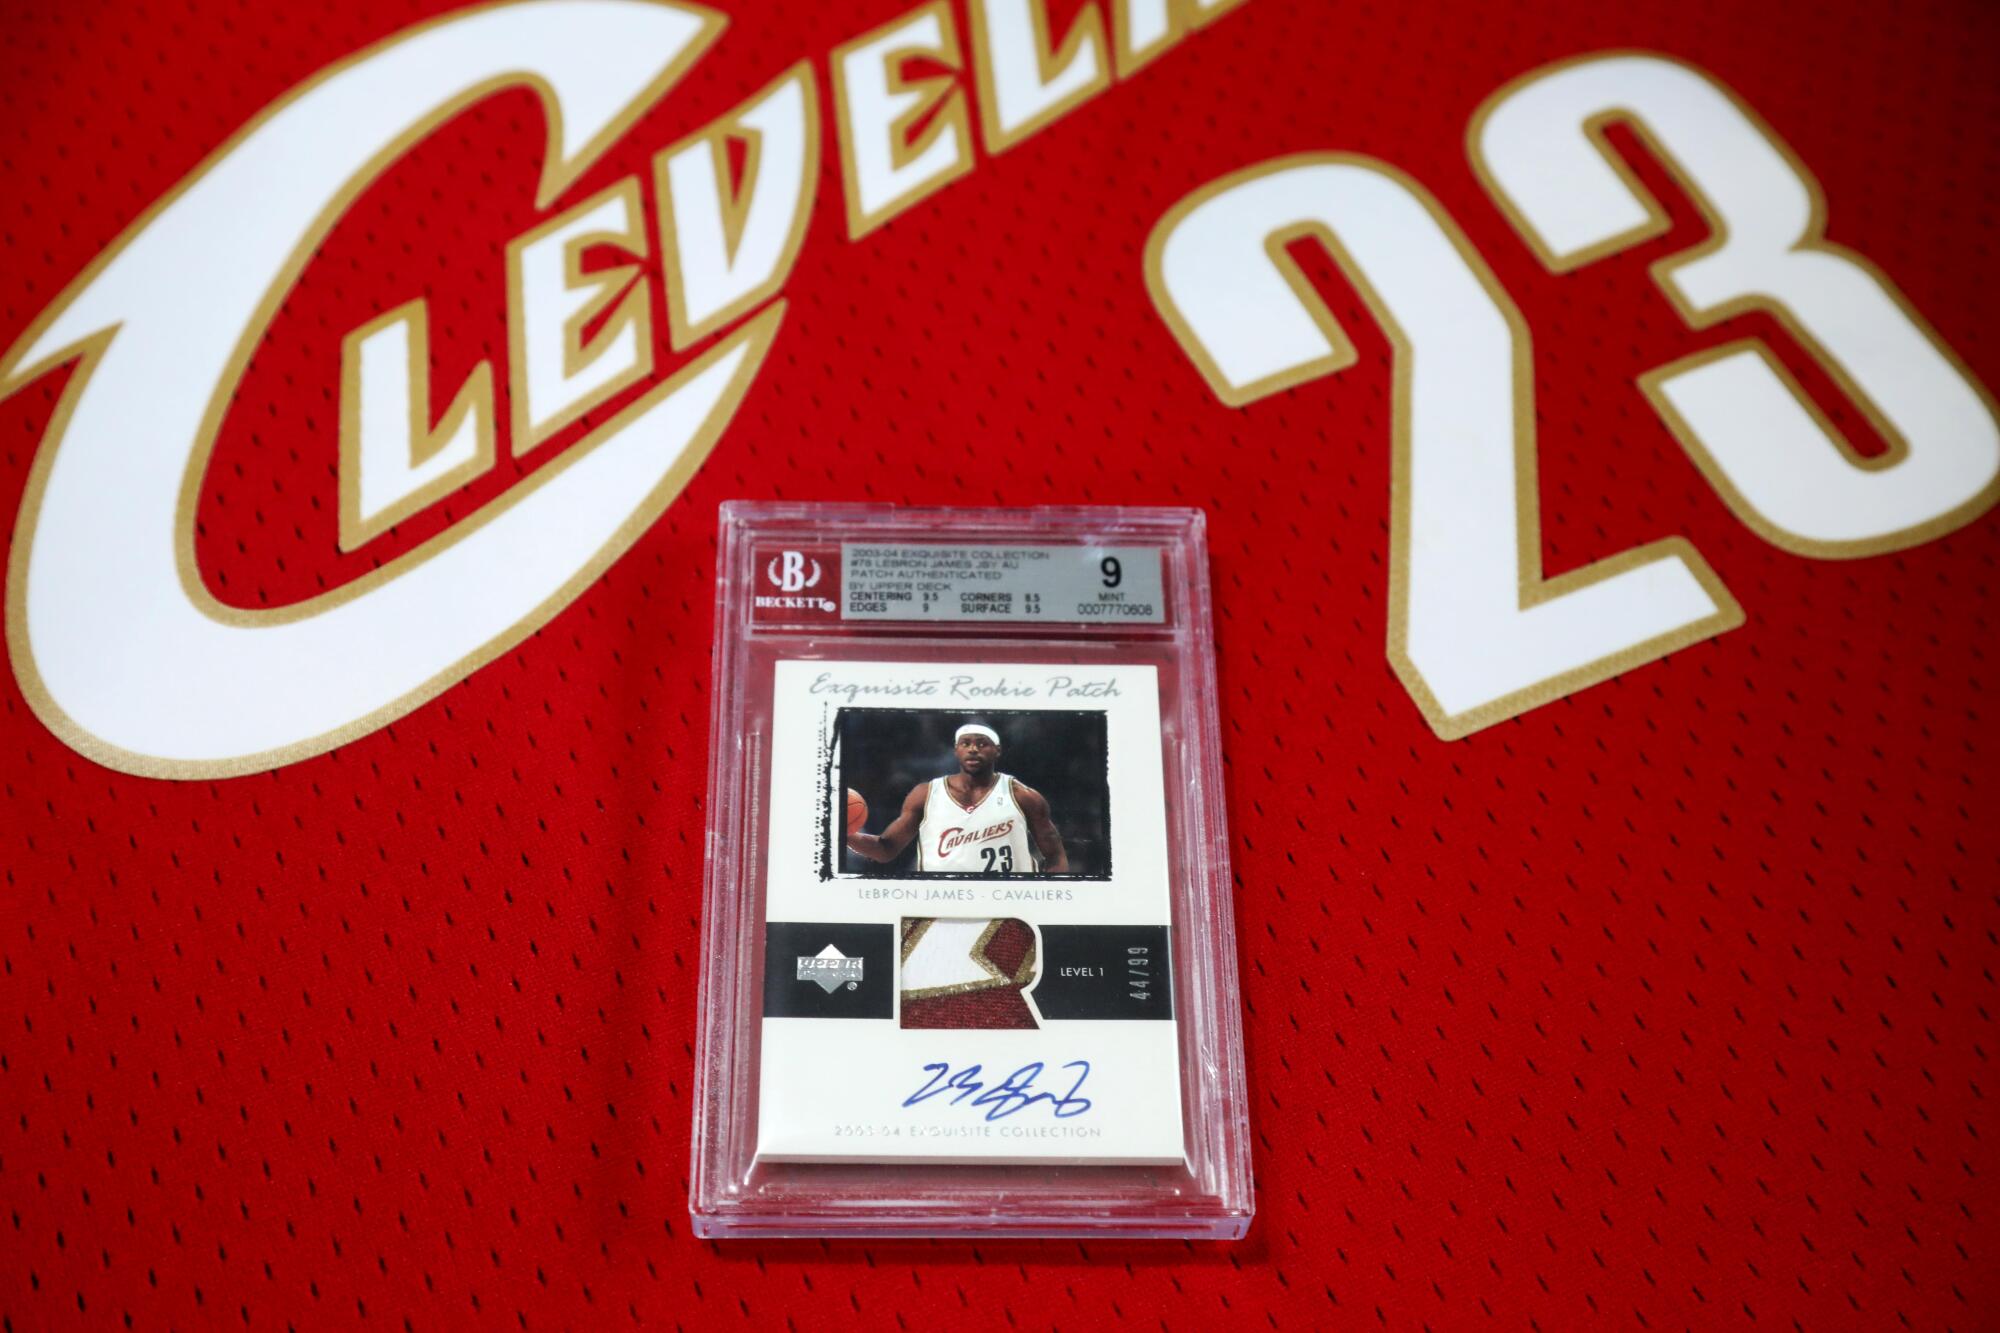 A LeBron James rookie card rests on a Cleveland Cavaliers jersey